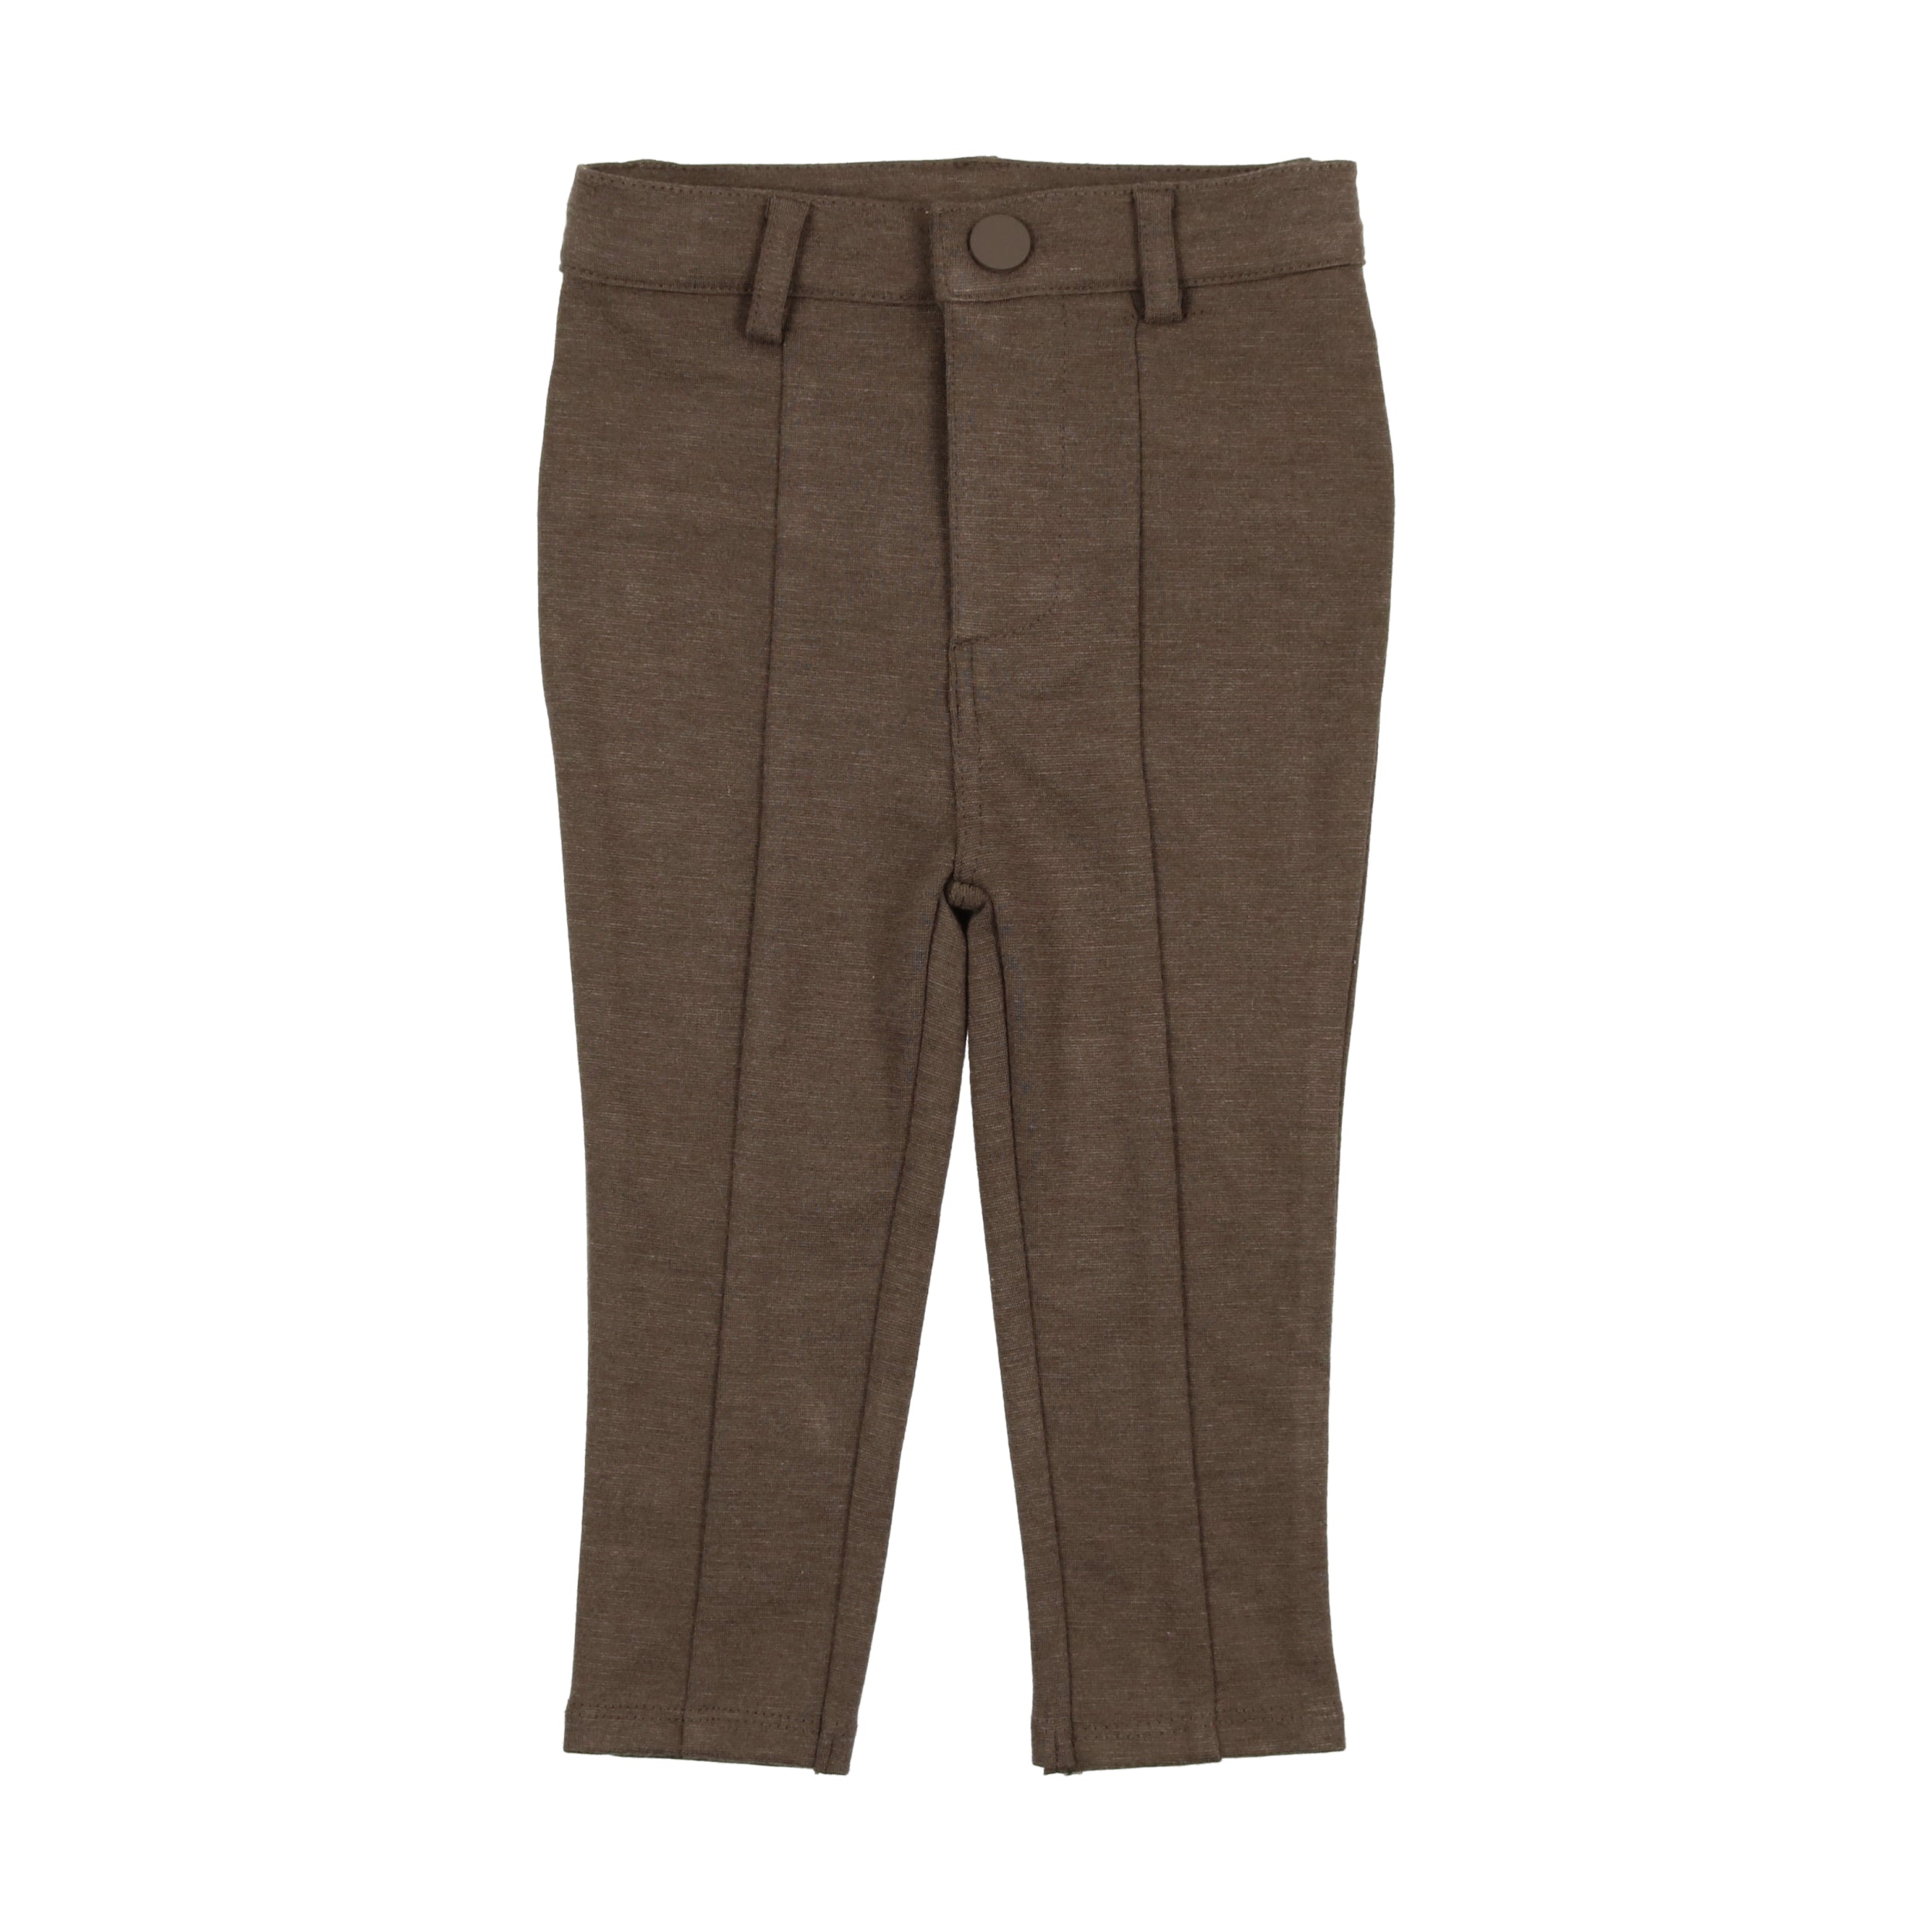 Heather Brown Knit Stretch Pants